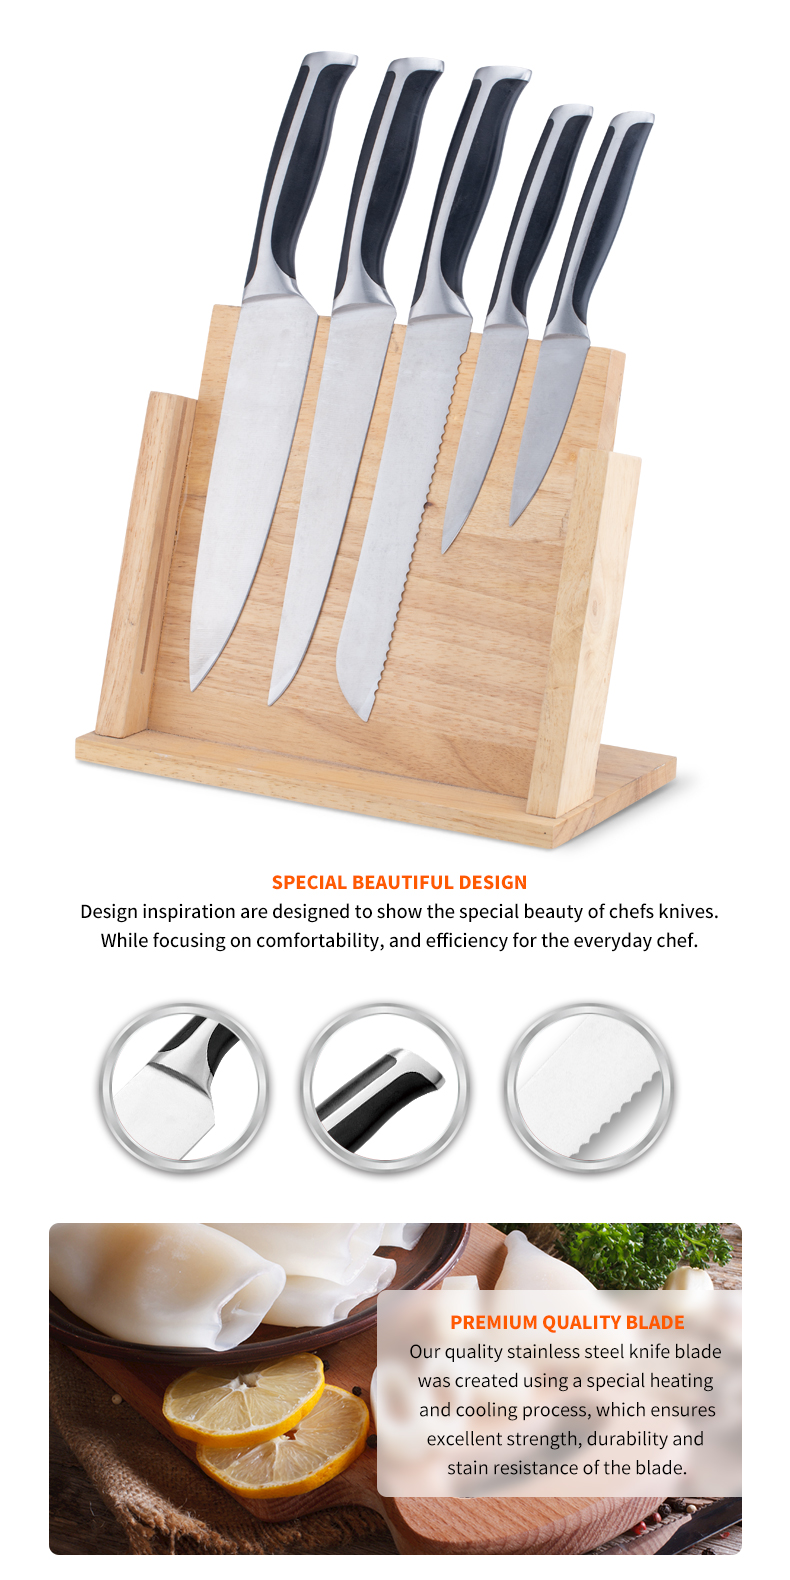 G104-6PCS kitchen knife set with double casting handle，Wood Magnetic knife holder-ZX | kitchen knife,Kitchen tools,Silicone Cake Mould,Cutting Board,Baking Tool Sets,Chef Knife,Steak Knife,Slicer knife,Utility Knife,Paring Knife,Knife block,Knife Stand,Santoku Knife,toddler Knife,Plastic Knife,Non Stick Painting Knife,Colorful Knife,Stainless Steel Knife,Can opener,bottle Opener,Tea Strainer,Grater,Egg Beater,Nylon Kitchen tool,Silicone Kitchen Tool,Cookie Cutter,Cooking Knife Set,Knife Sharpener,Peeler,Cake Knife,Cheese Knife,Pizza Knife,Silicone Spatular,Silicone Spoon,Food Tong,Forged knife,Kitchen Scissors,cake baking knives,Children’s Cooking knives,Carving Knife